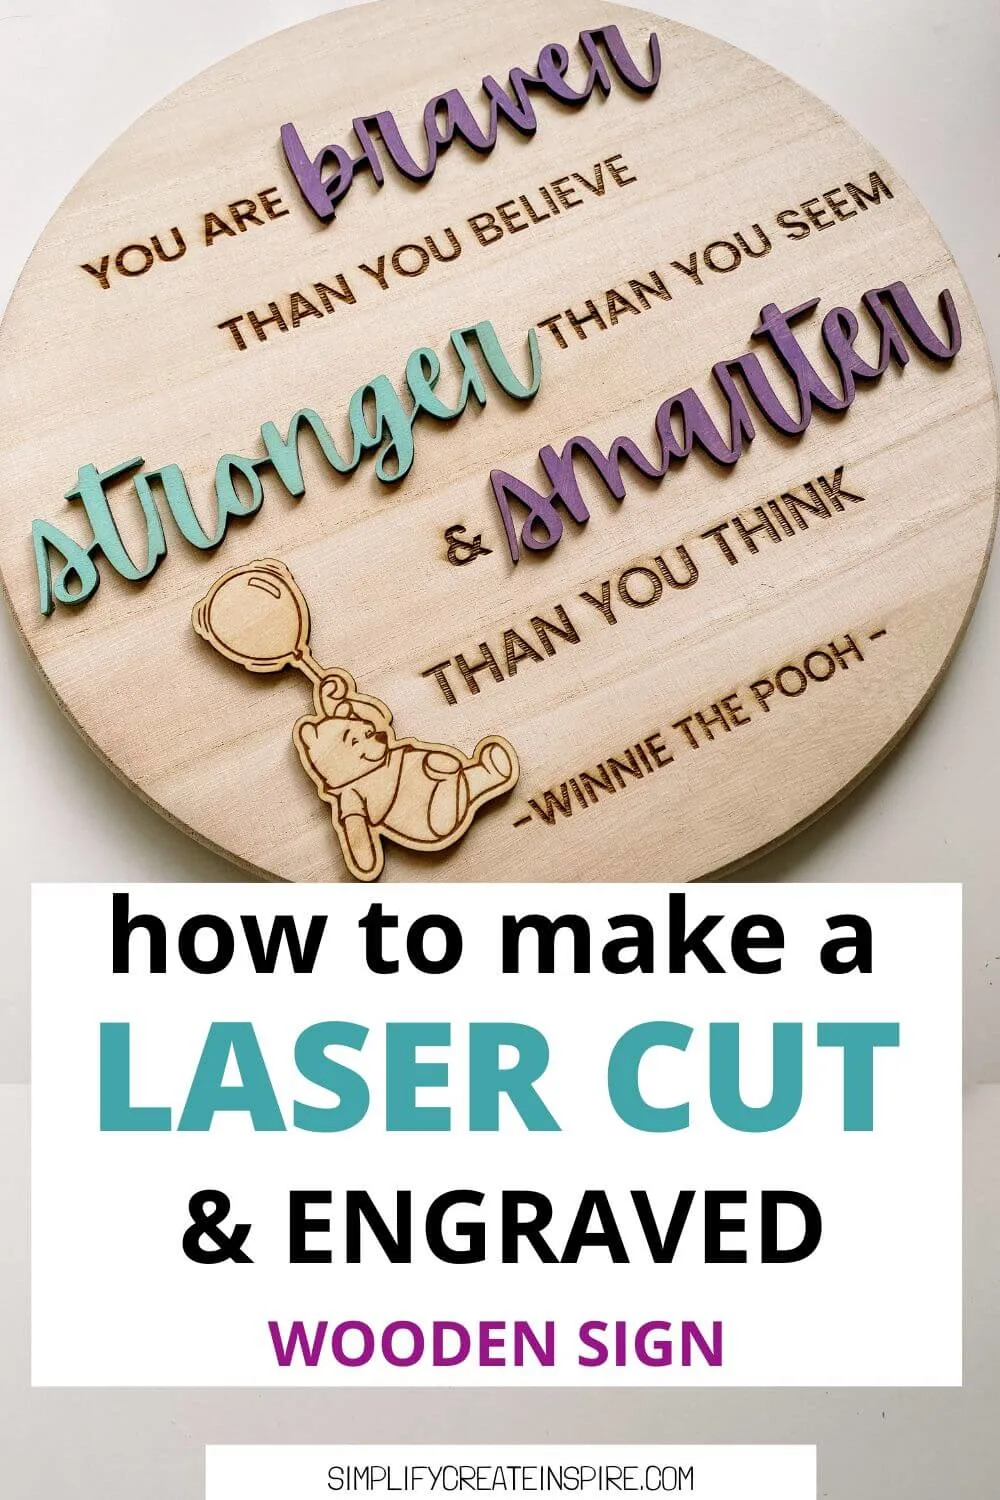 pinterest image - how to make a laser cut wooden sign